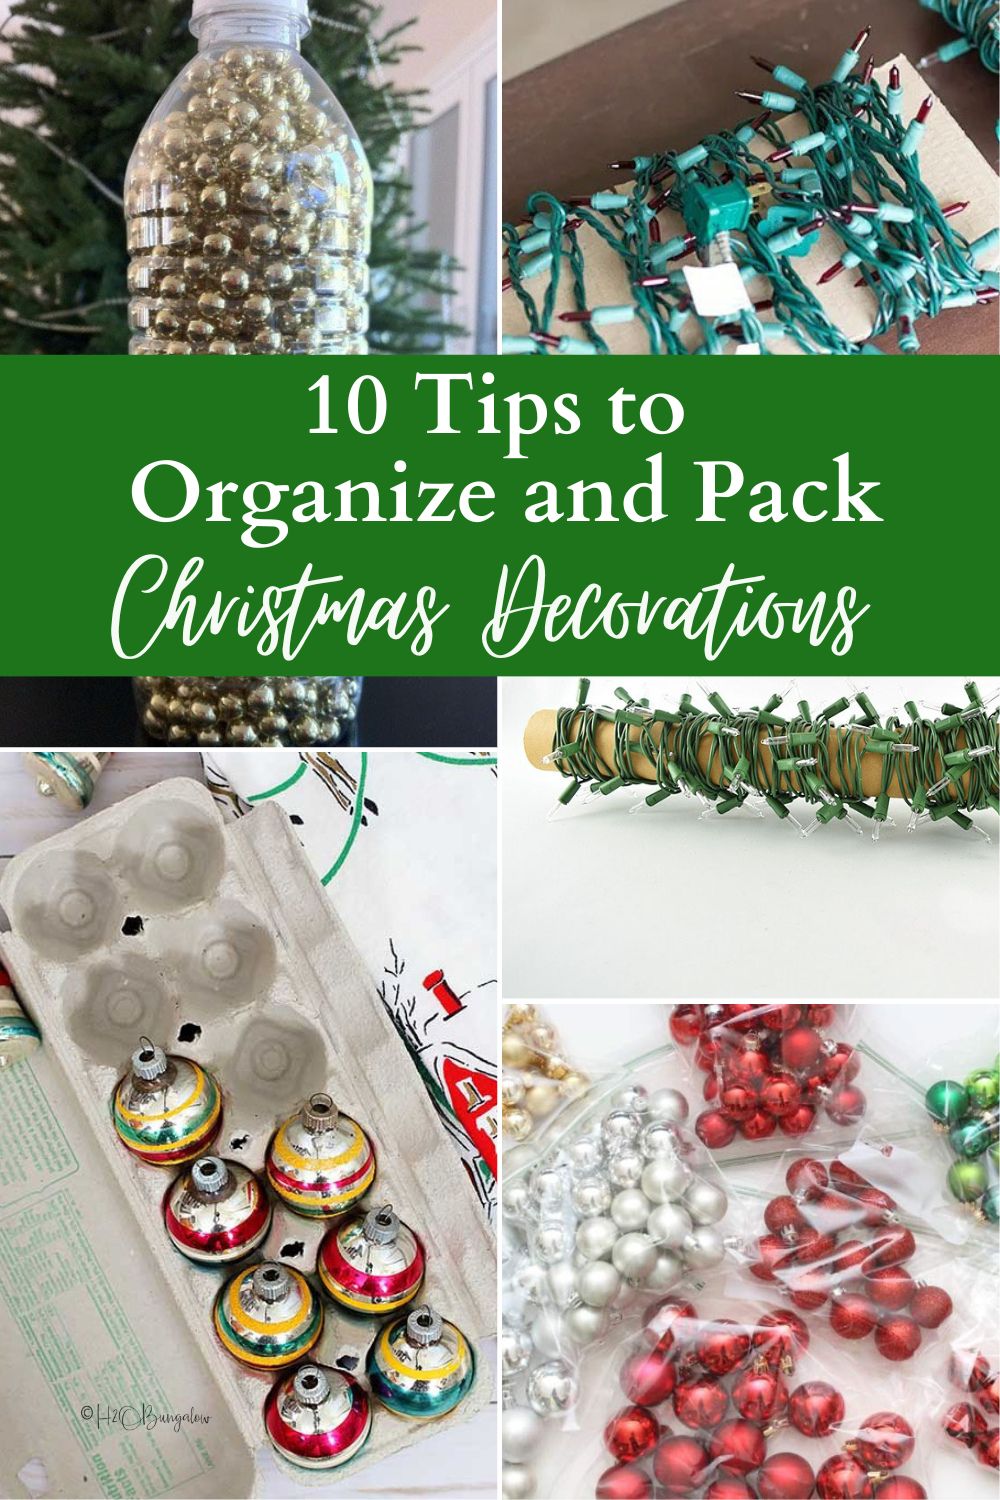 Image collage of five ways to organize and pack Christmas decorations with text overlay